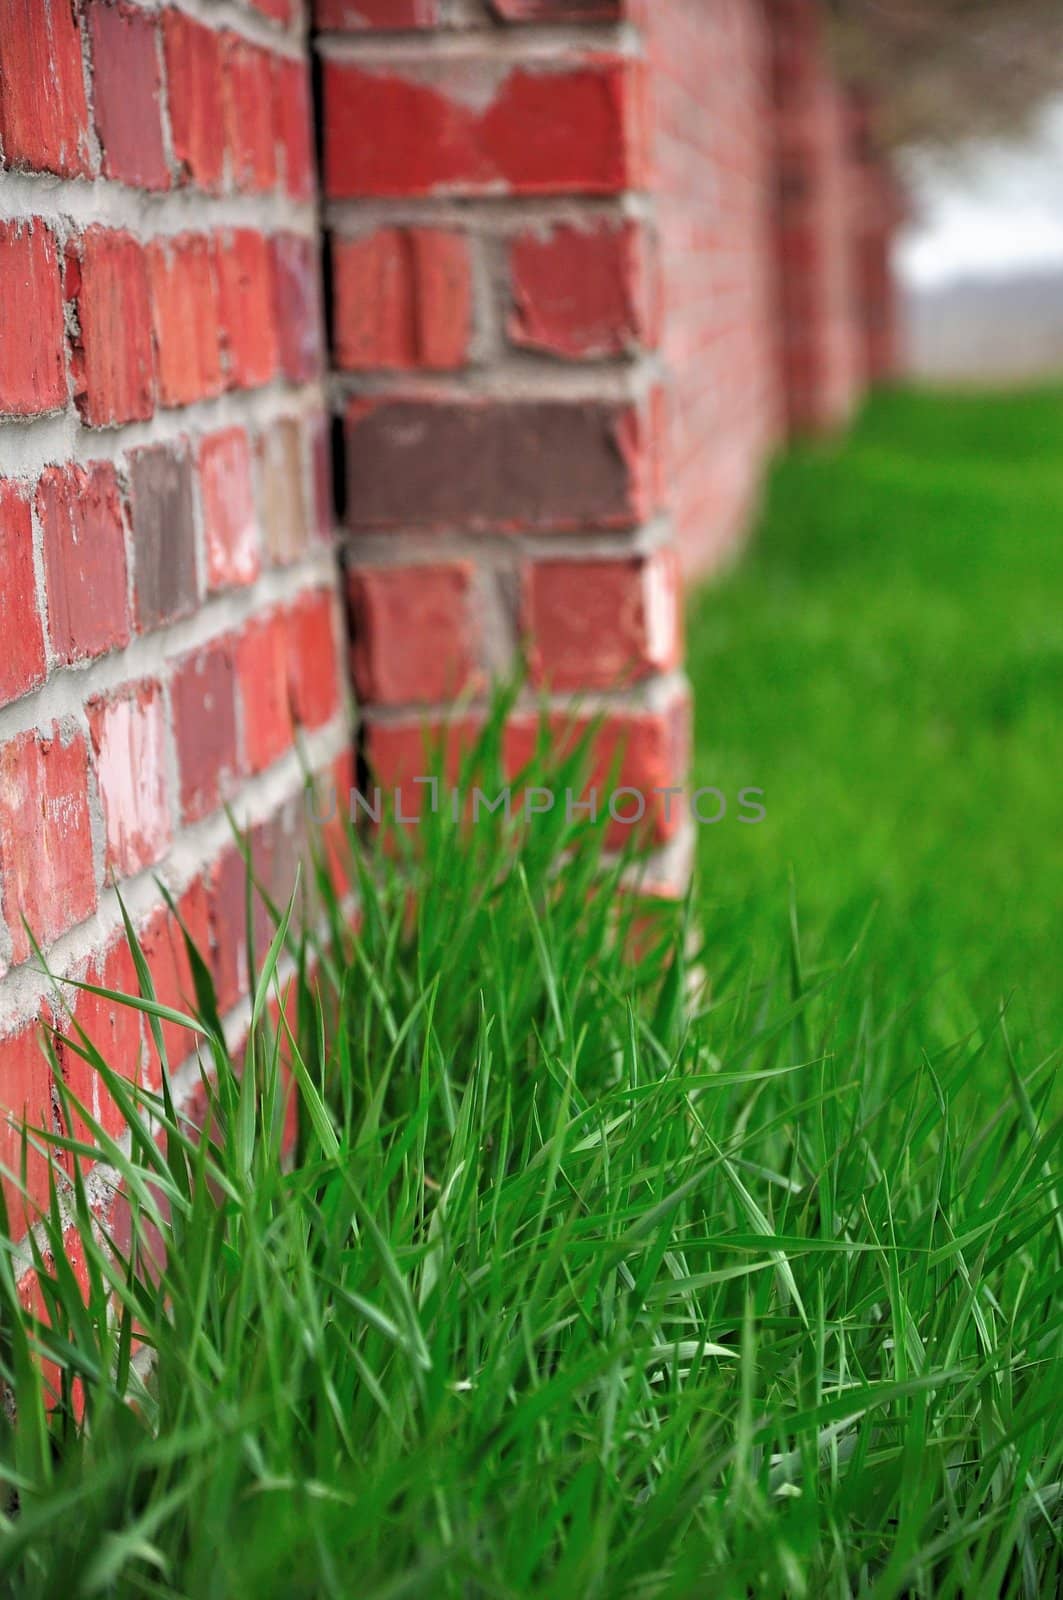 Red Brick Wall and Green Grass by gilmourbto2001